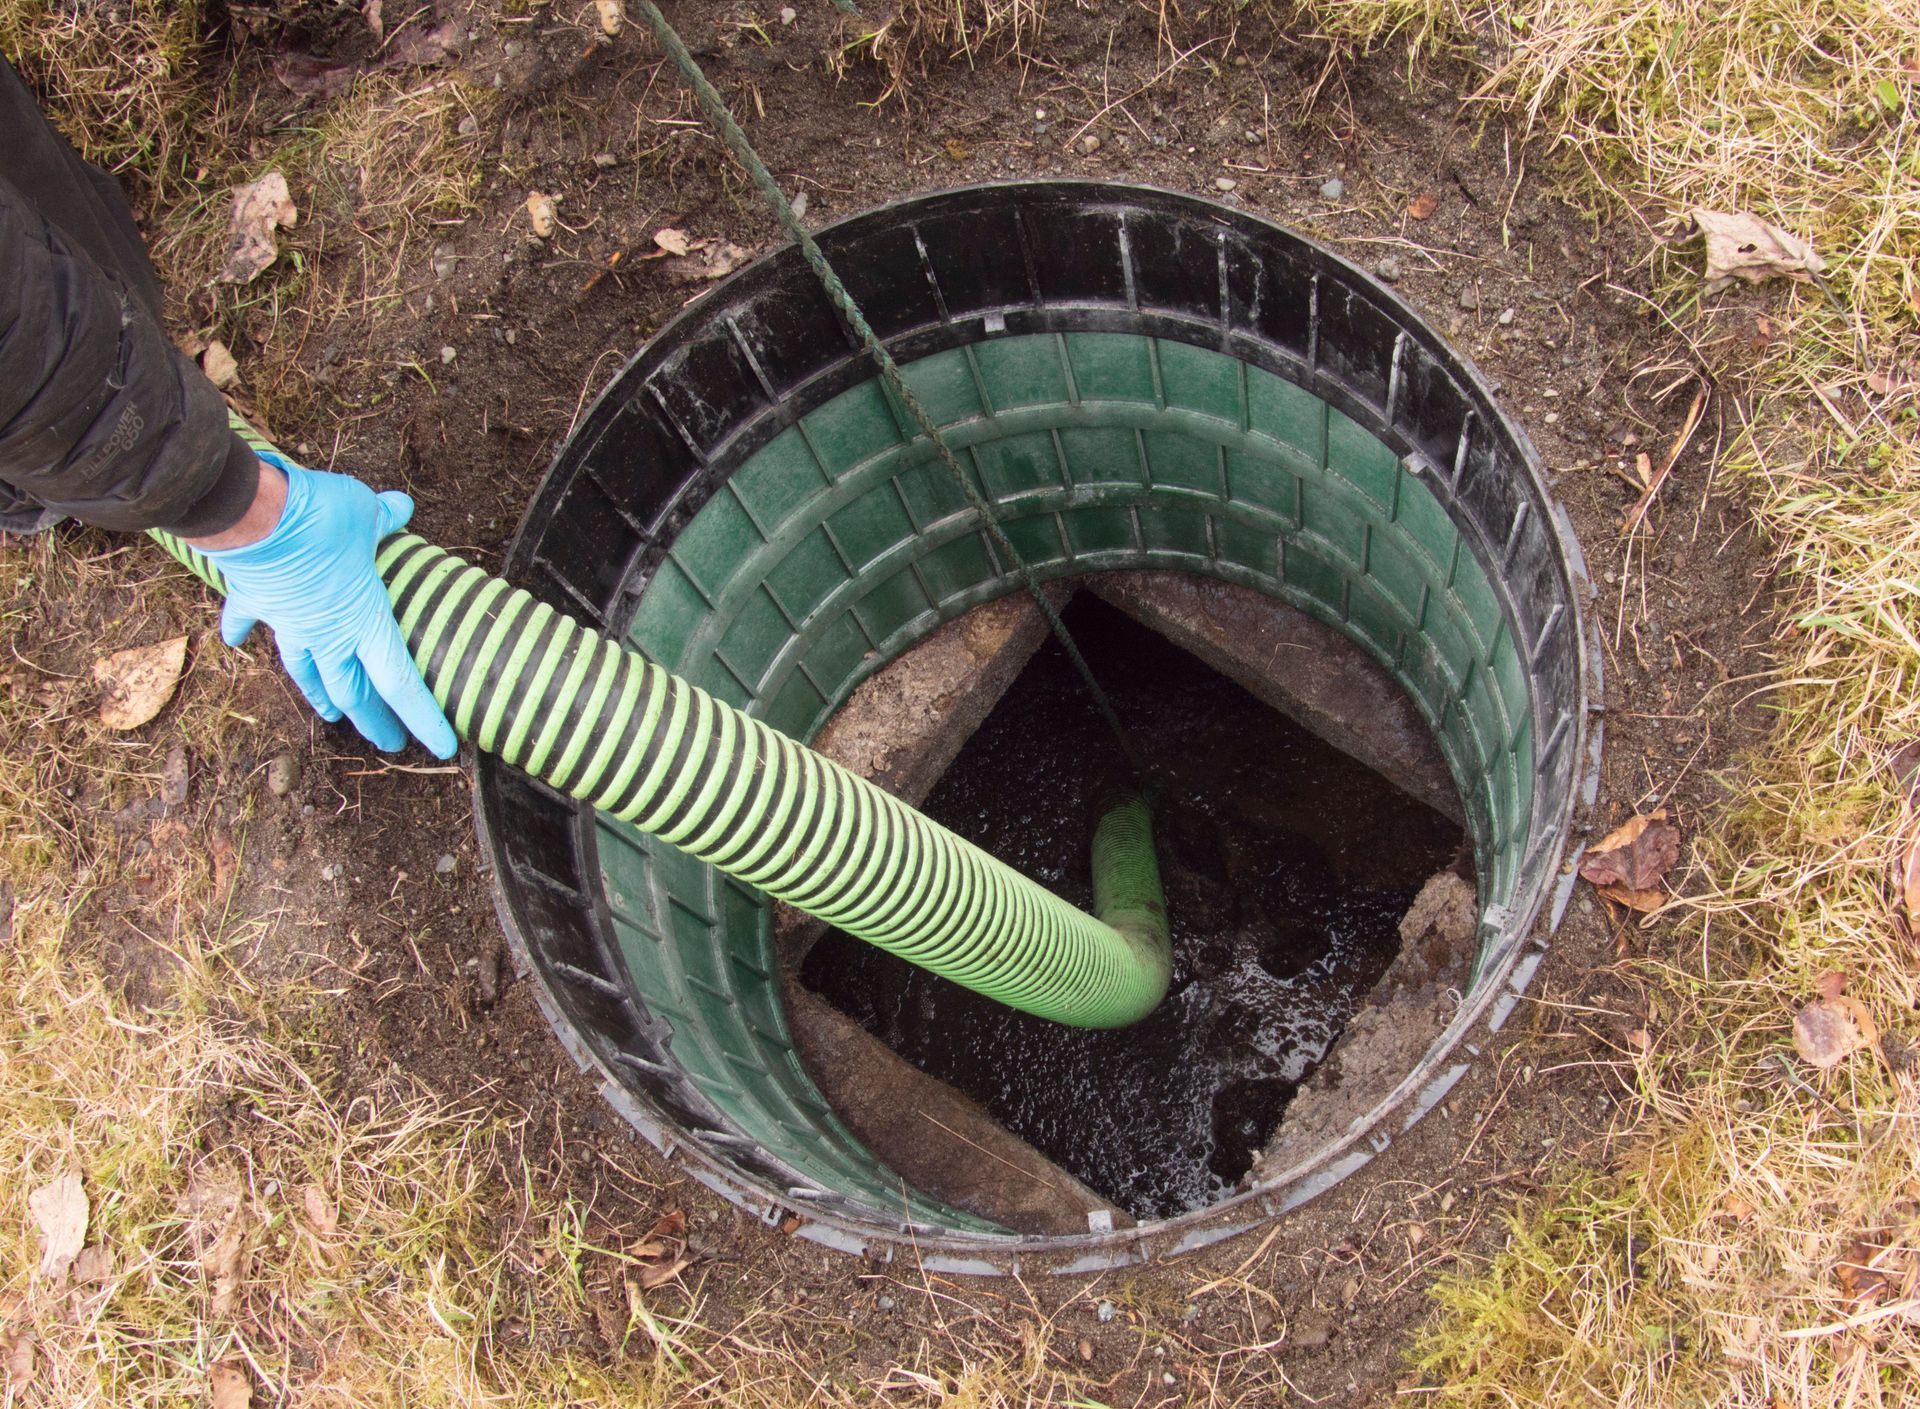 A hose pumping out a home septic tank to remove waste and maintain proper sanitation.